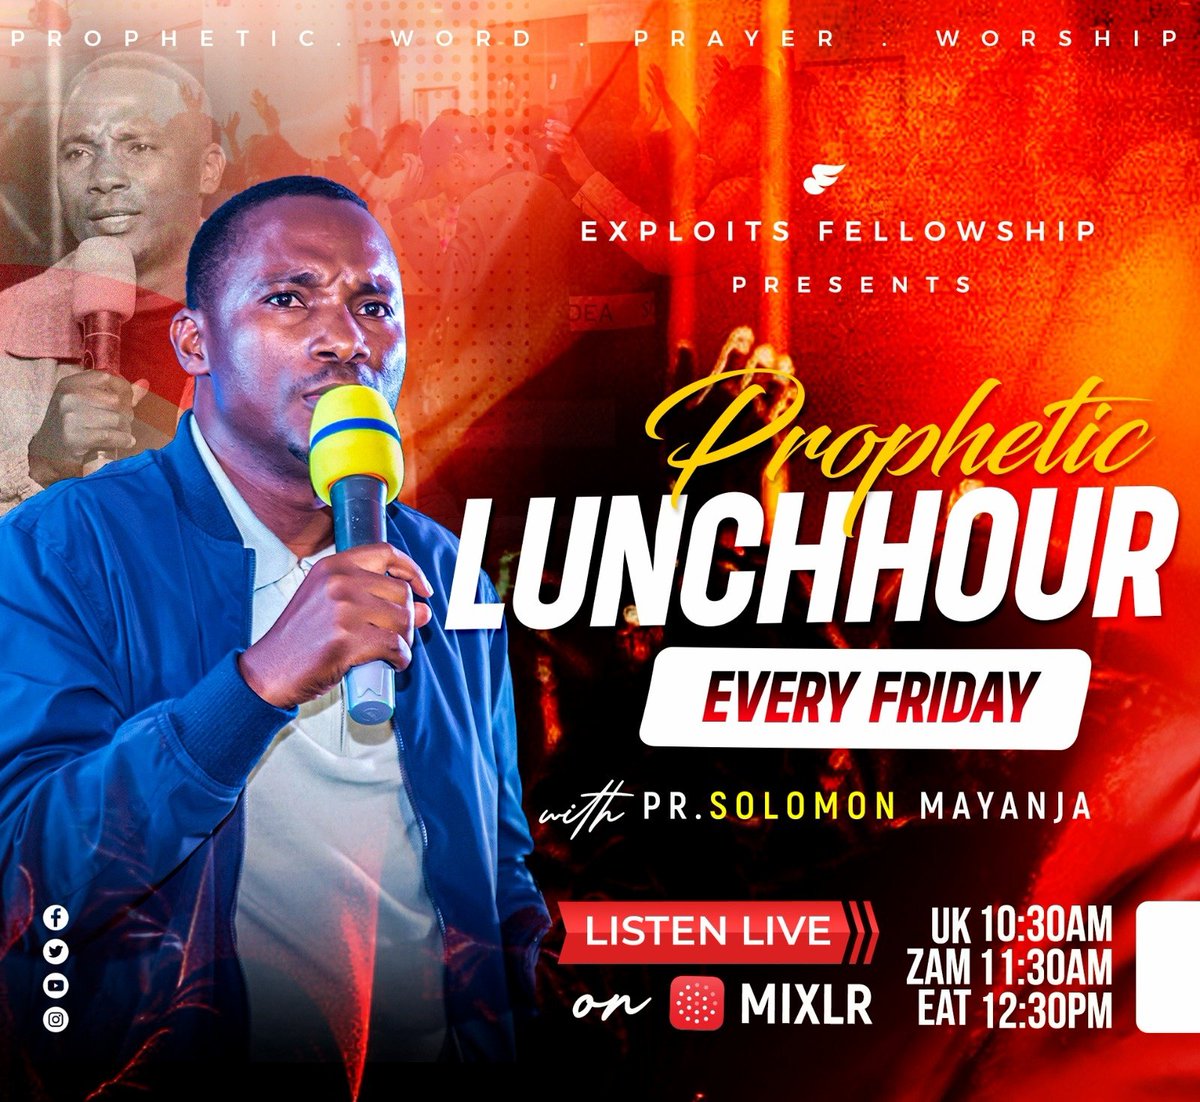 Join us Live for a Friday Prophetic Prayer Moment on Mixlr at 12:30pm. Your miracle is waiting for you. #ExploitsFellowship